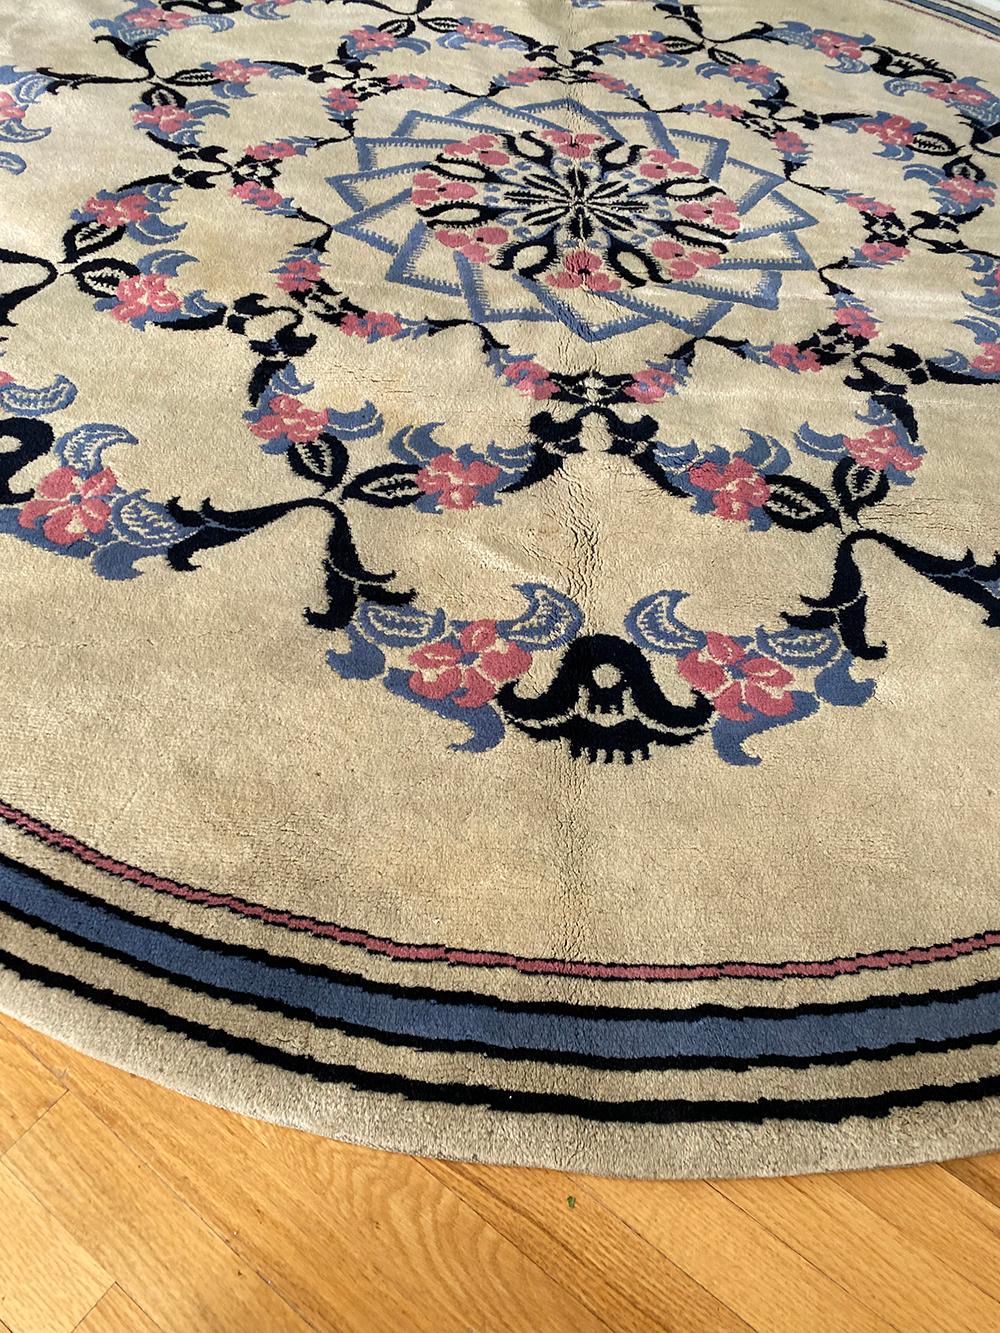 Good quality French carpet from the 40's or 50's